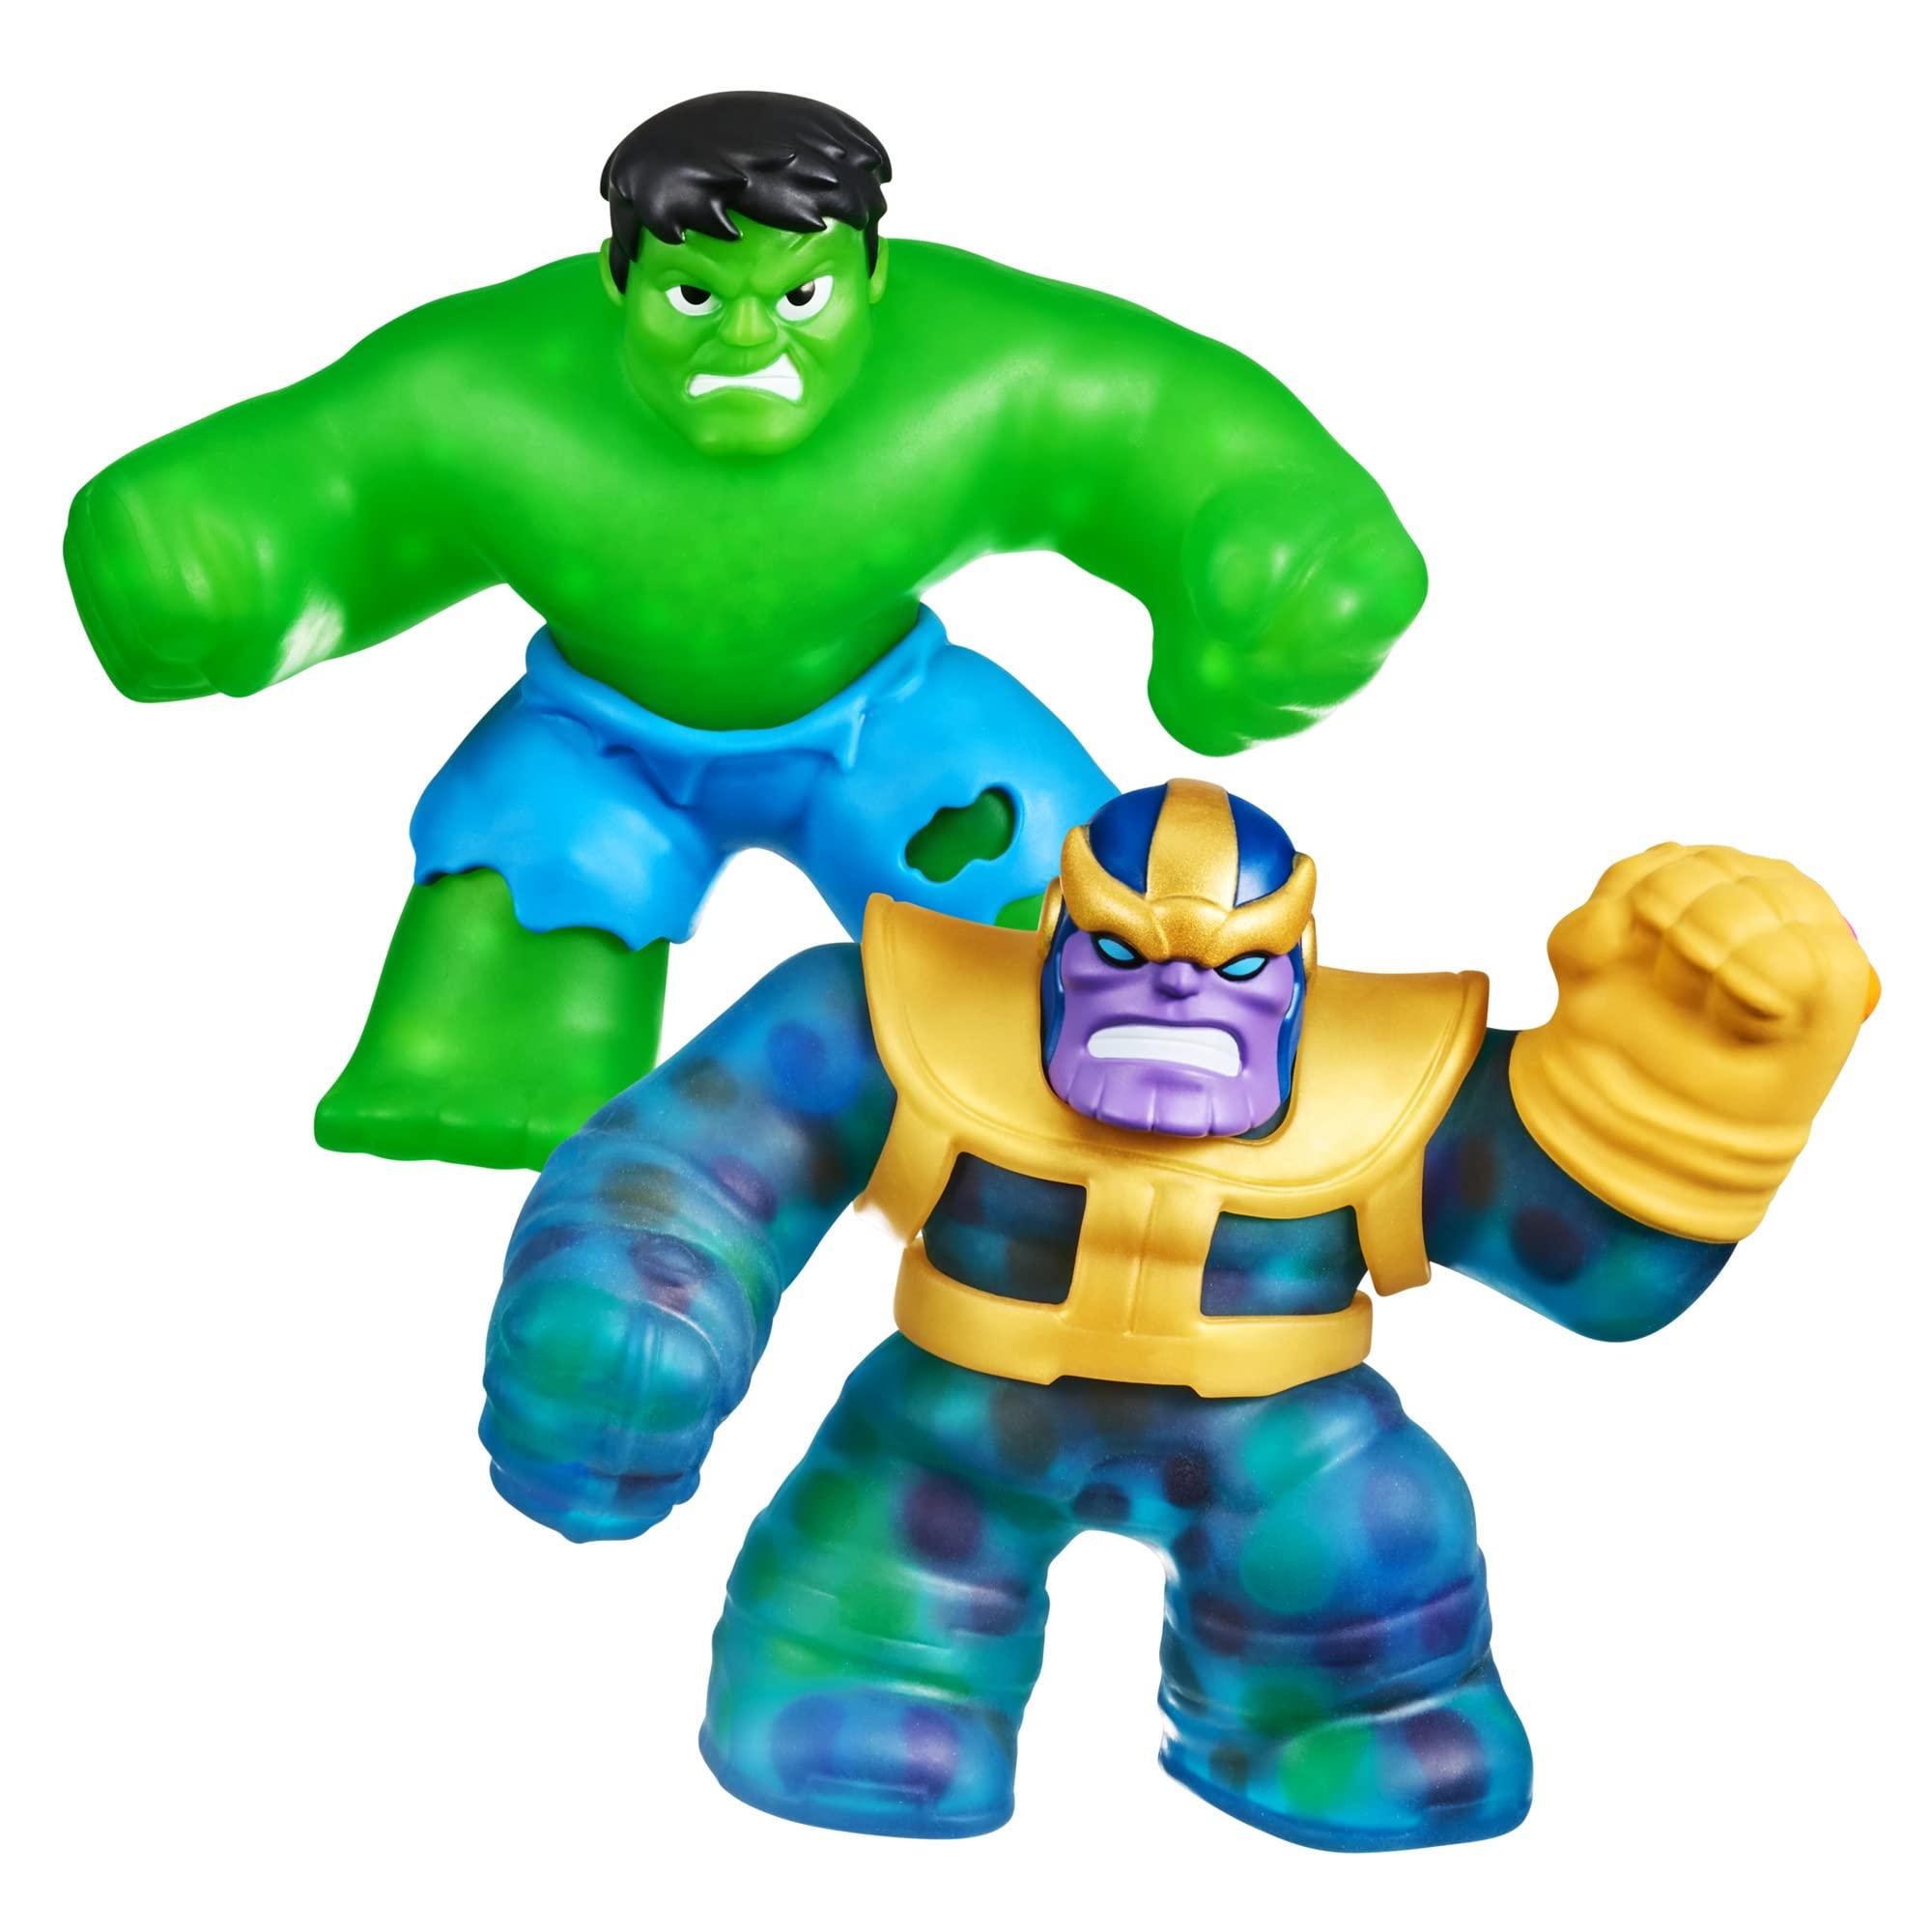 Remote Control Hulk: Check out glowing customer reviews of the exciting remote control Hulk toy.